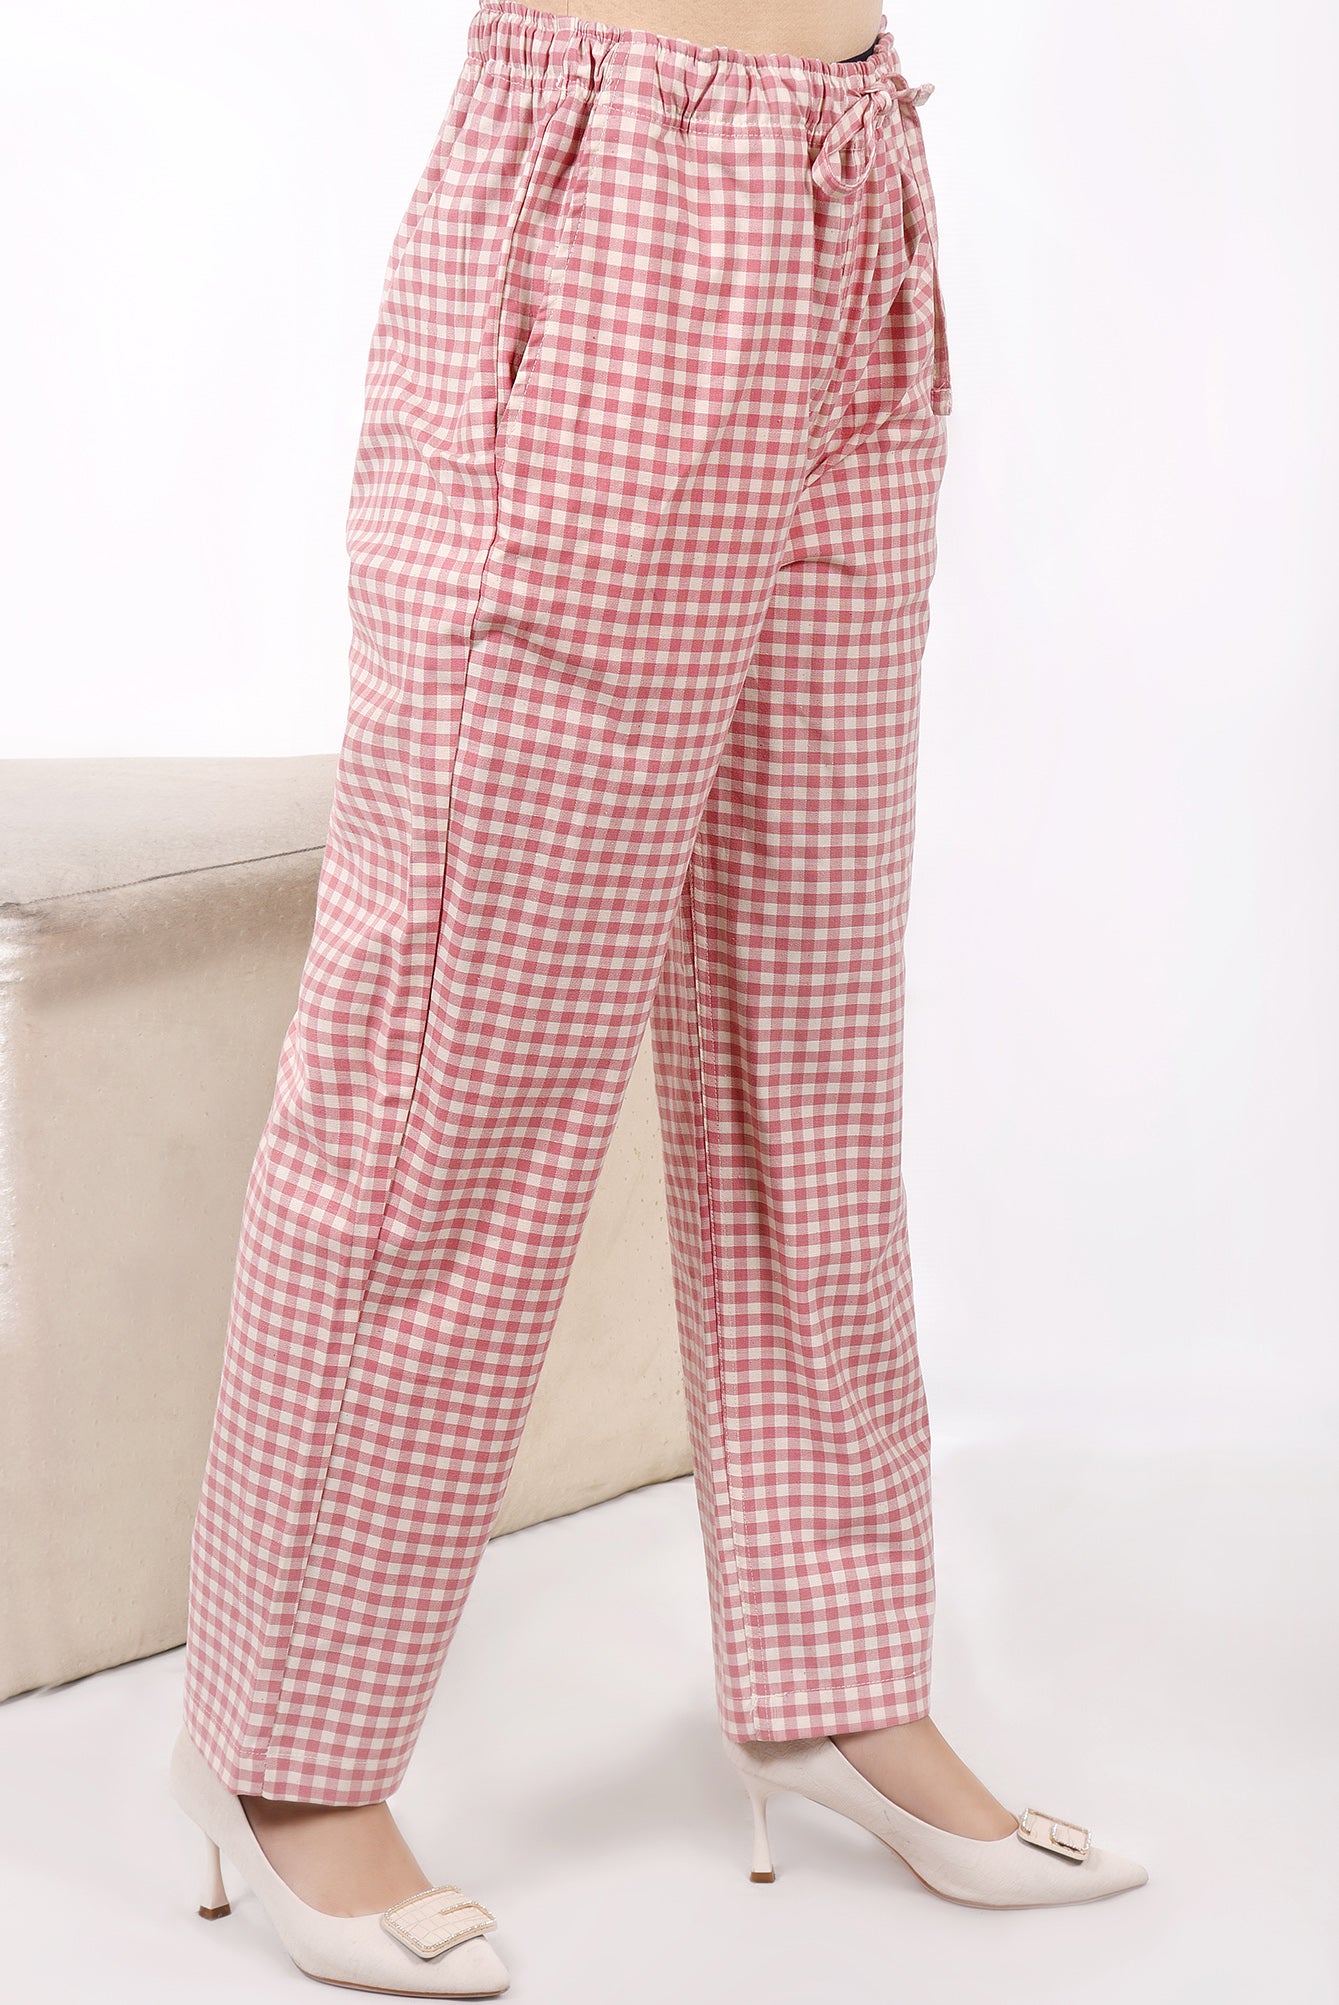 LT-1023 PULL ON TROUSER PINK CHECK